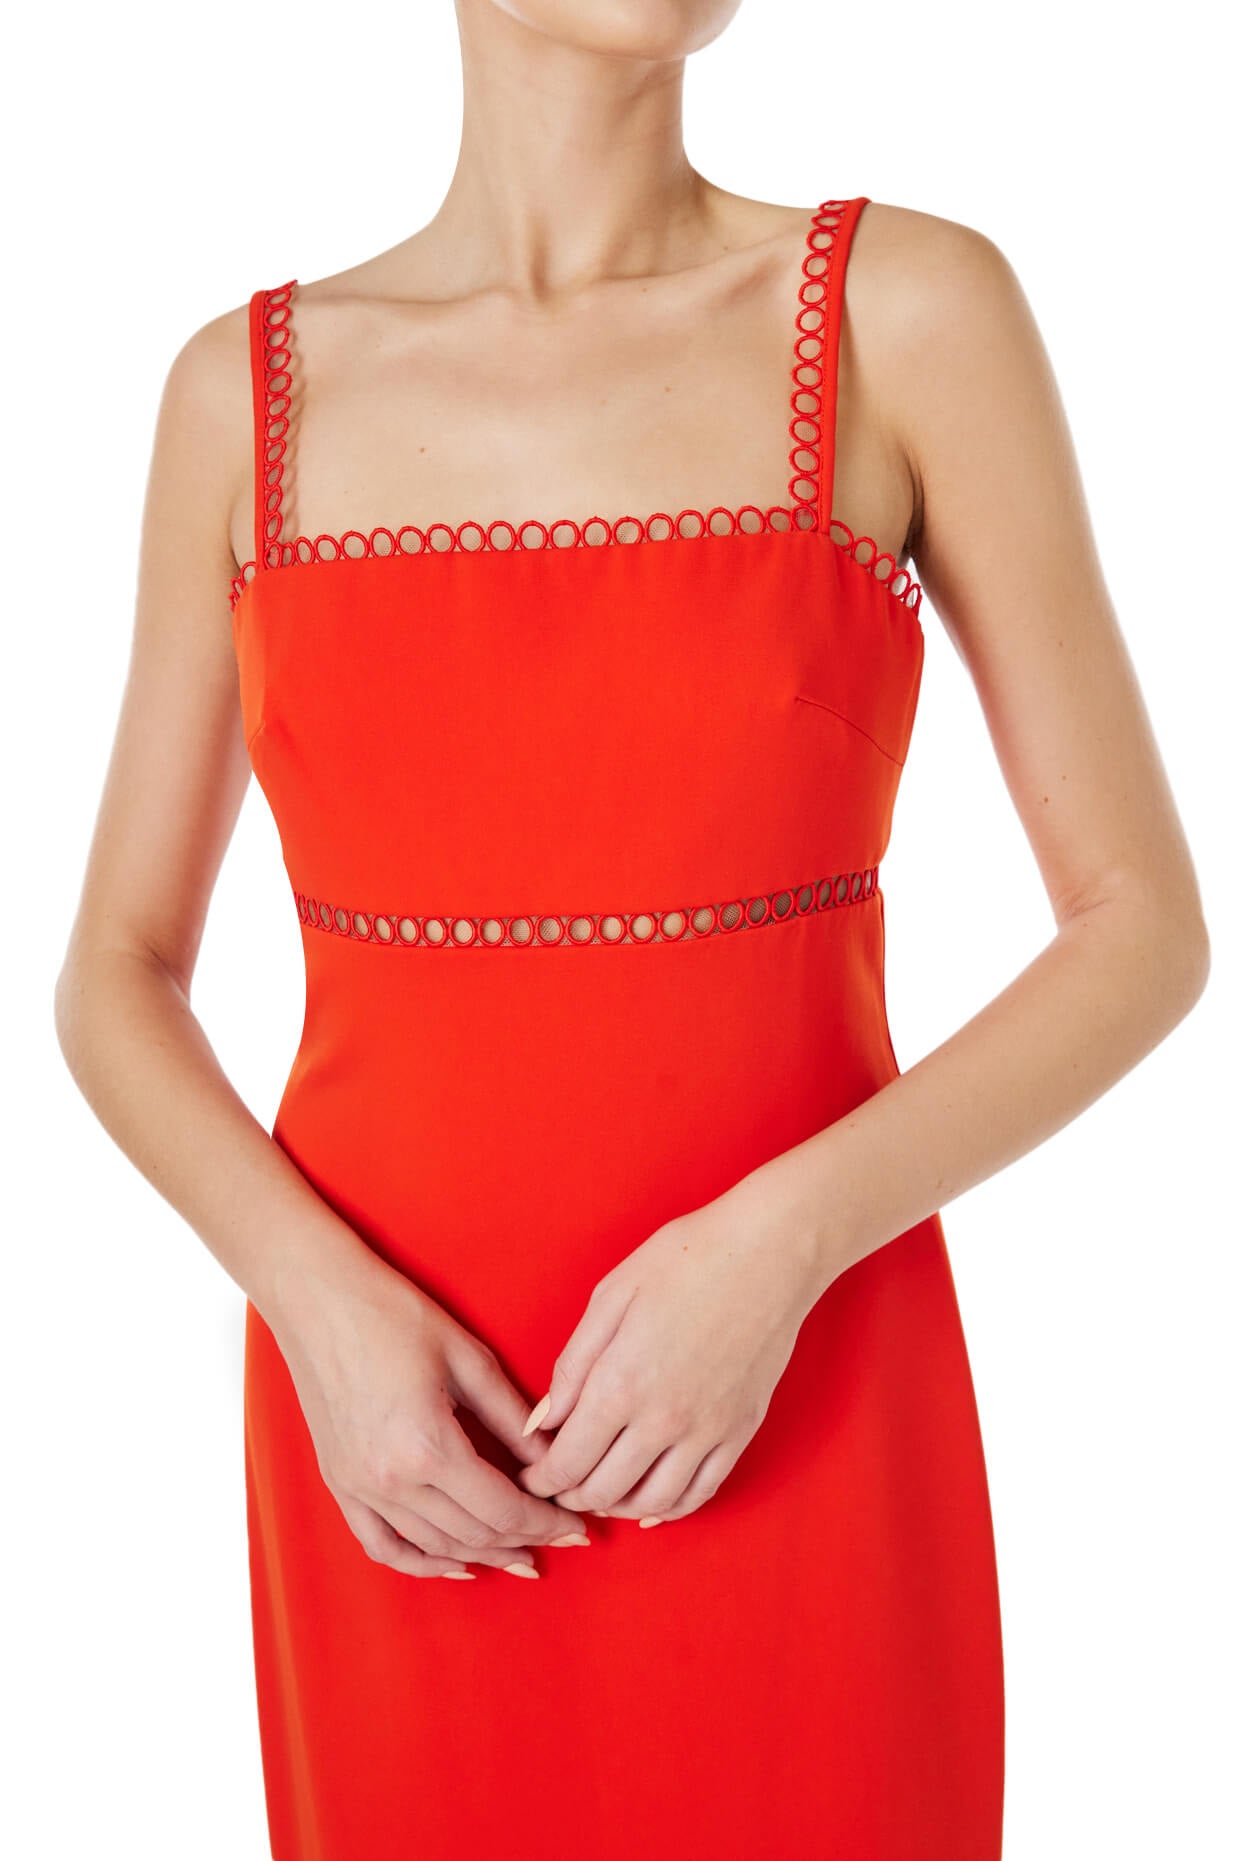 ML Monique Lhuillier red crepe dress with straps, eyelet embroidery and waist cutout.